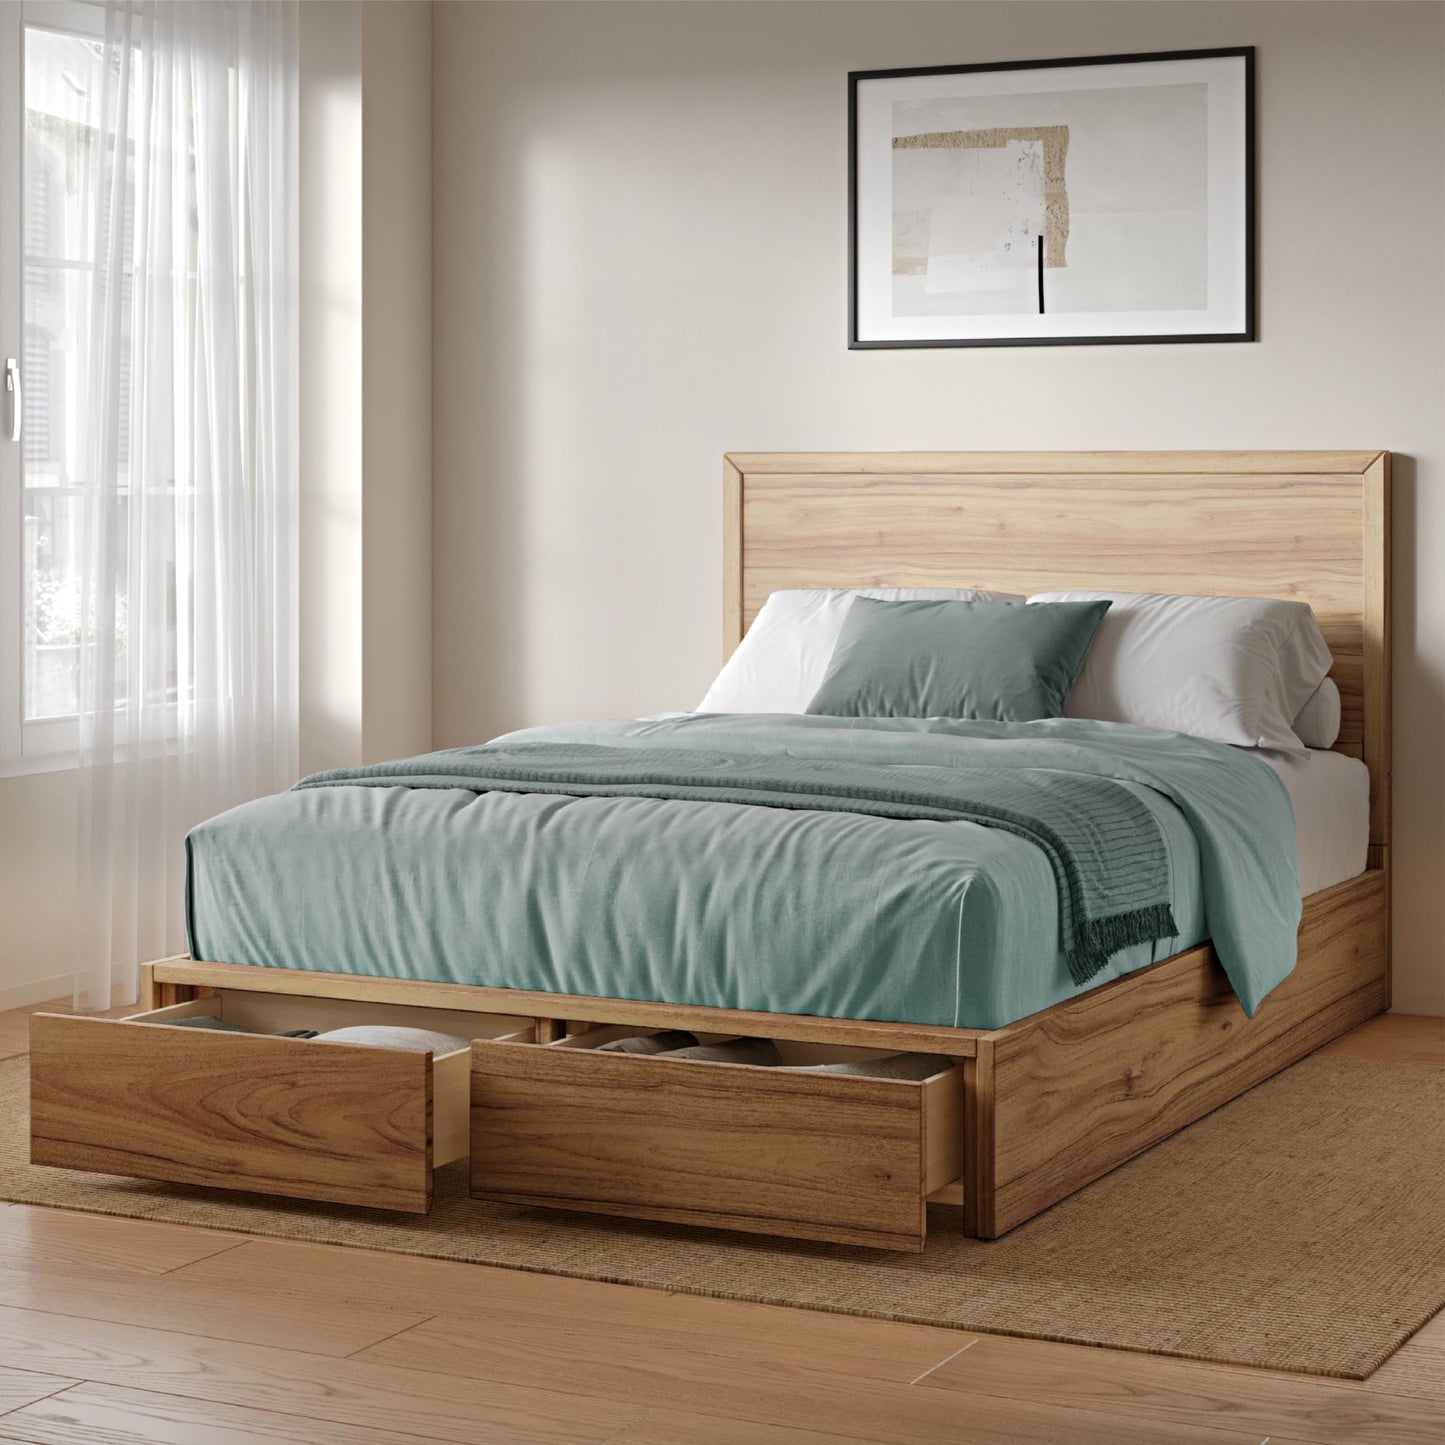 DG Casa Colten Queen Storage Bed with Headboard – Natural Oak Queen Size Wooden Bed Frame with Storage Drawers and Full Wooden Slats – Box Spring Not